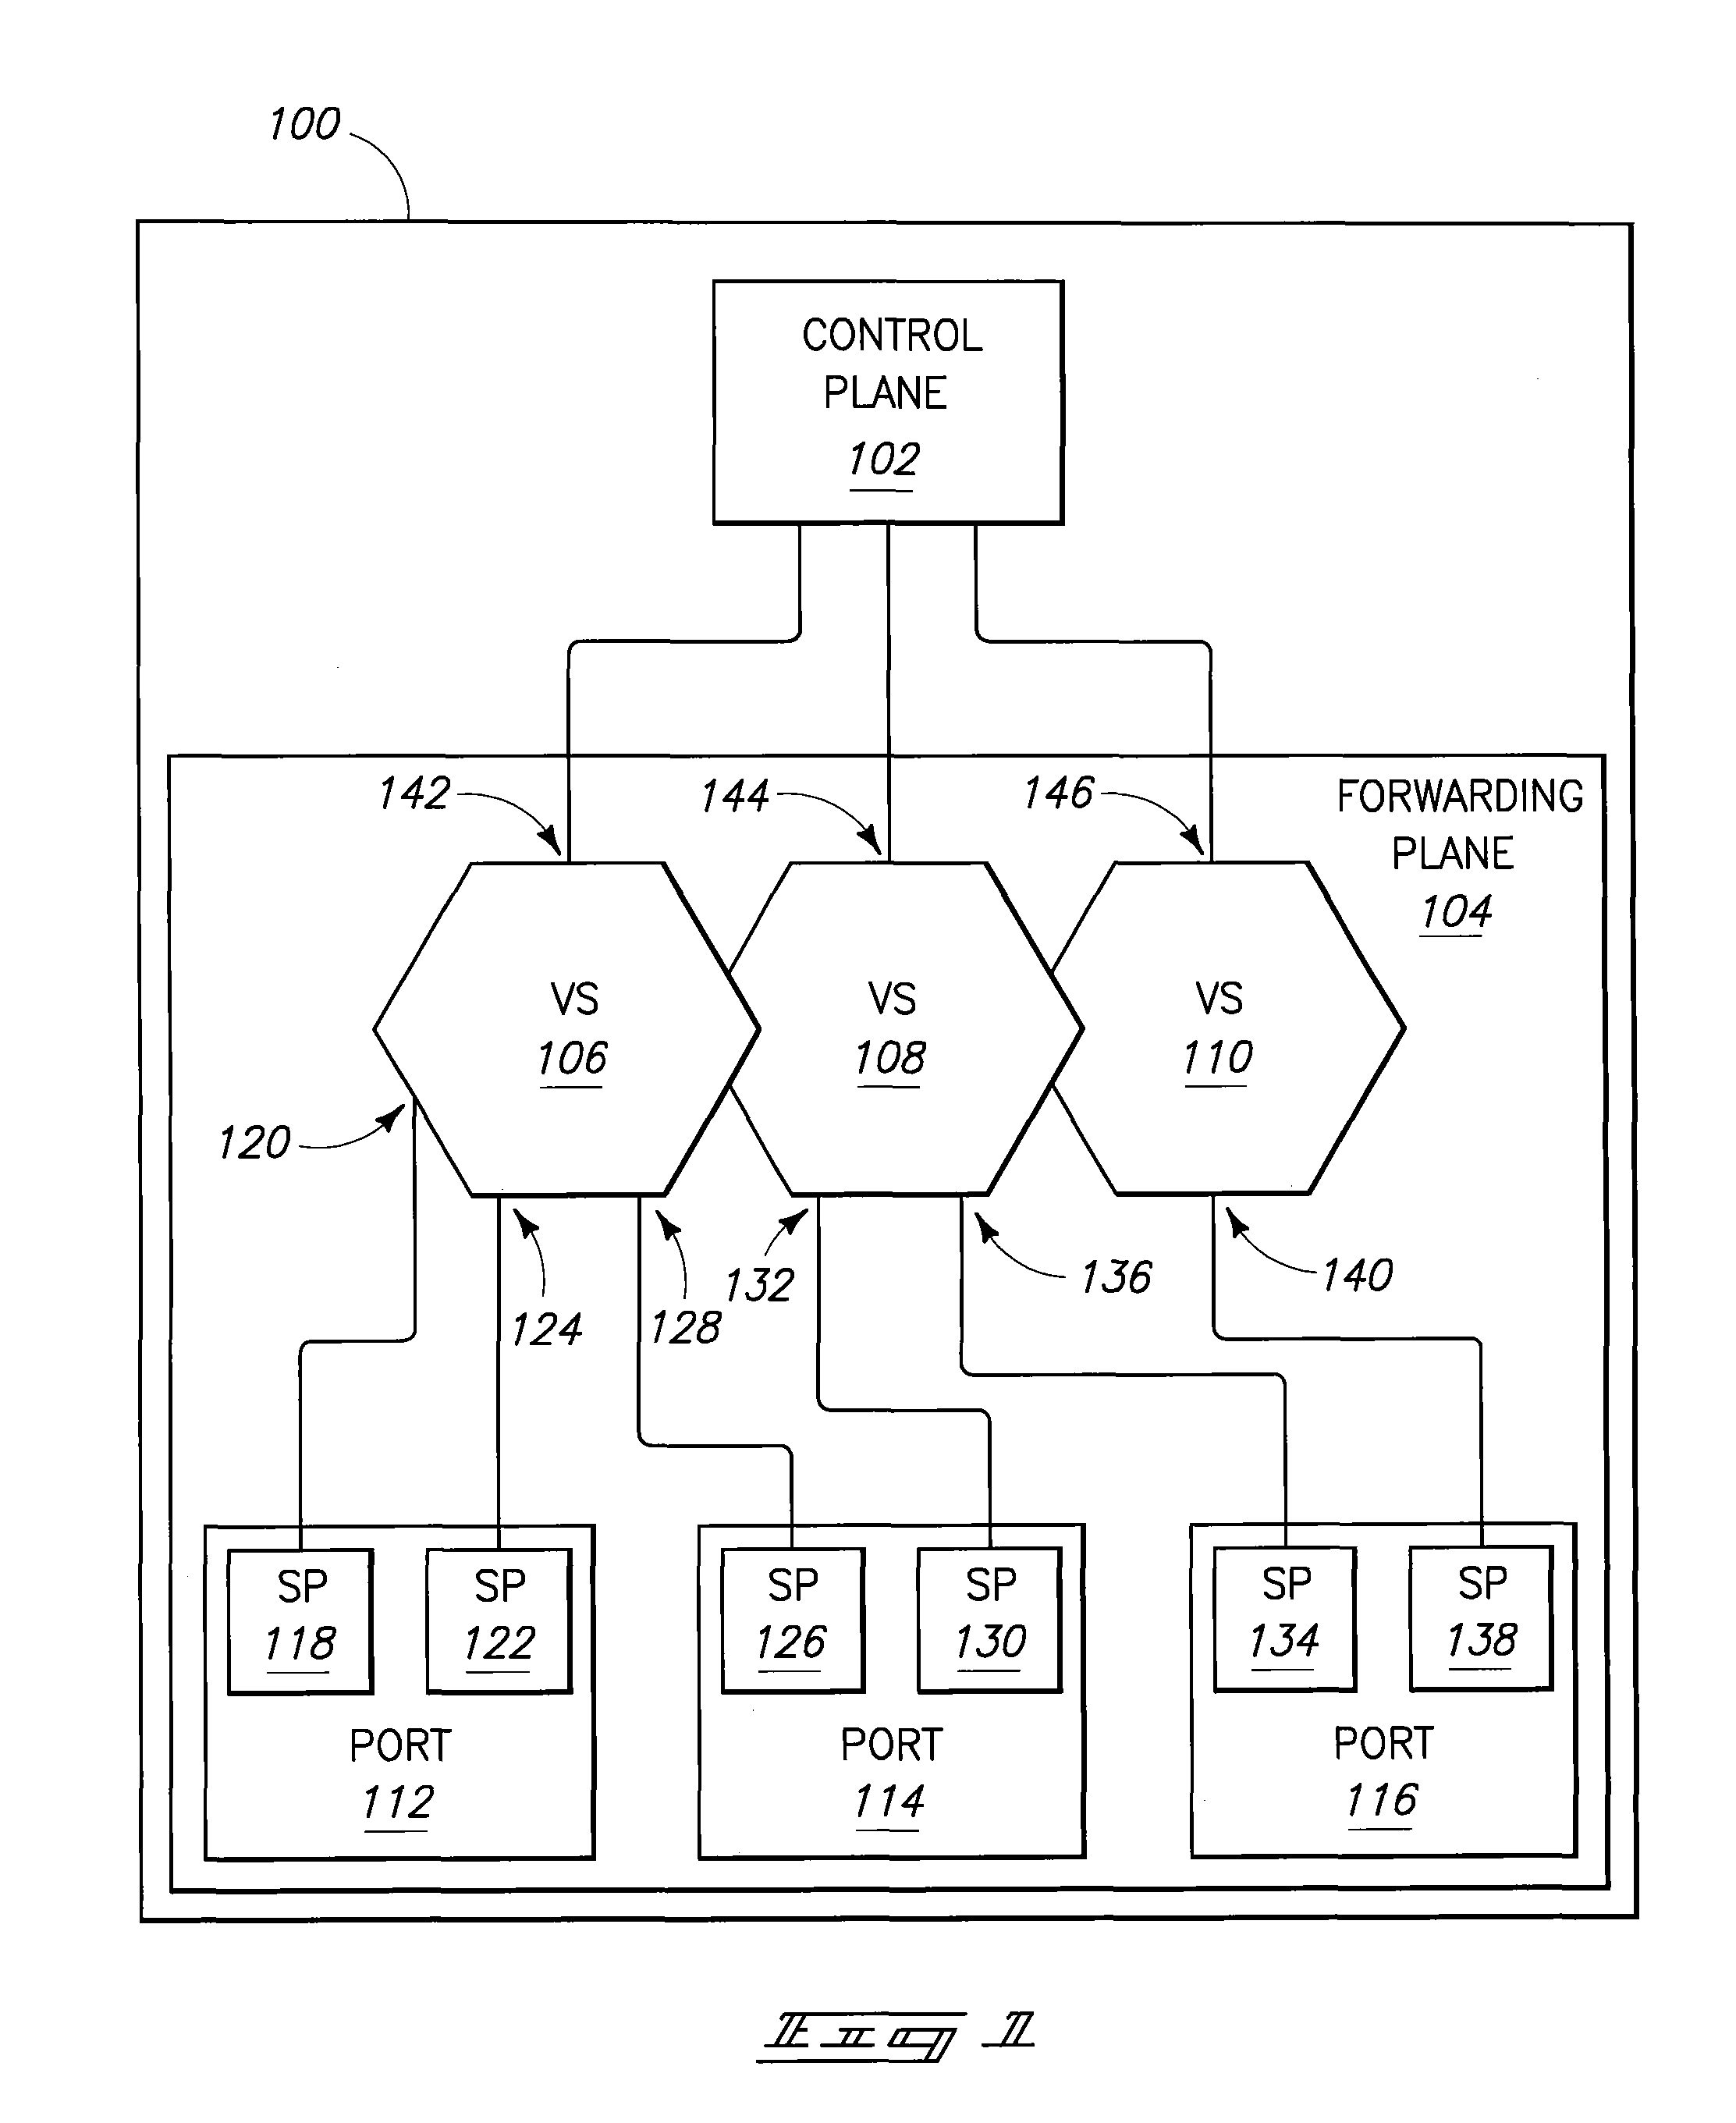 Communicating with a control plane using a forwarding information format and control plane processing of packets devoid of a virtual switch identifier